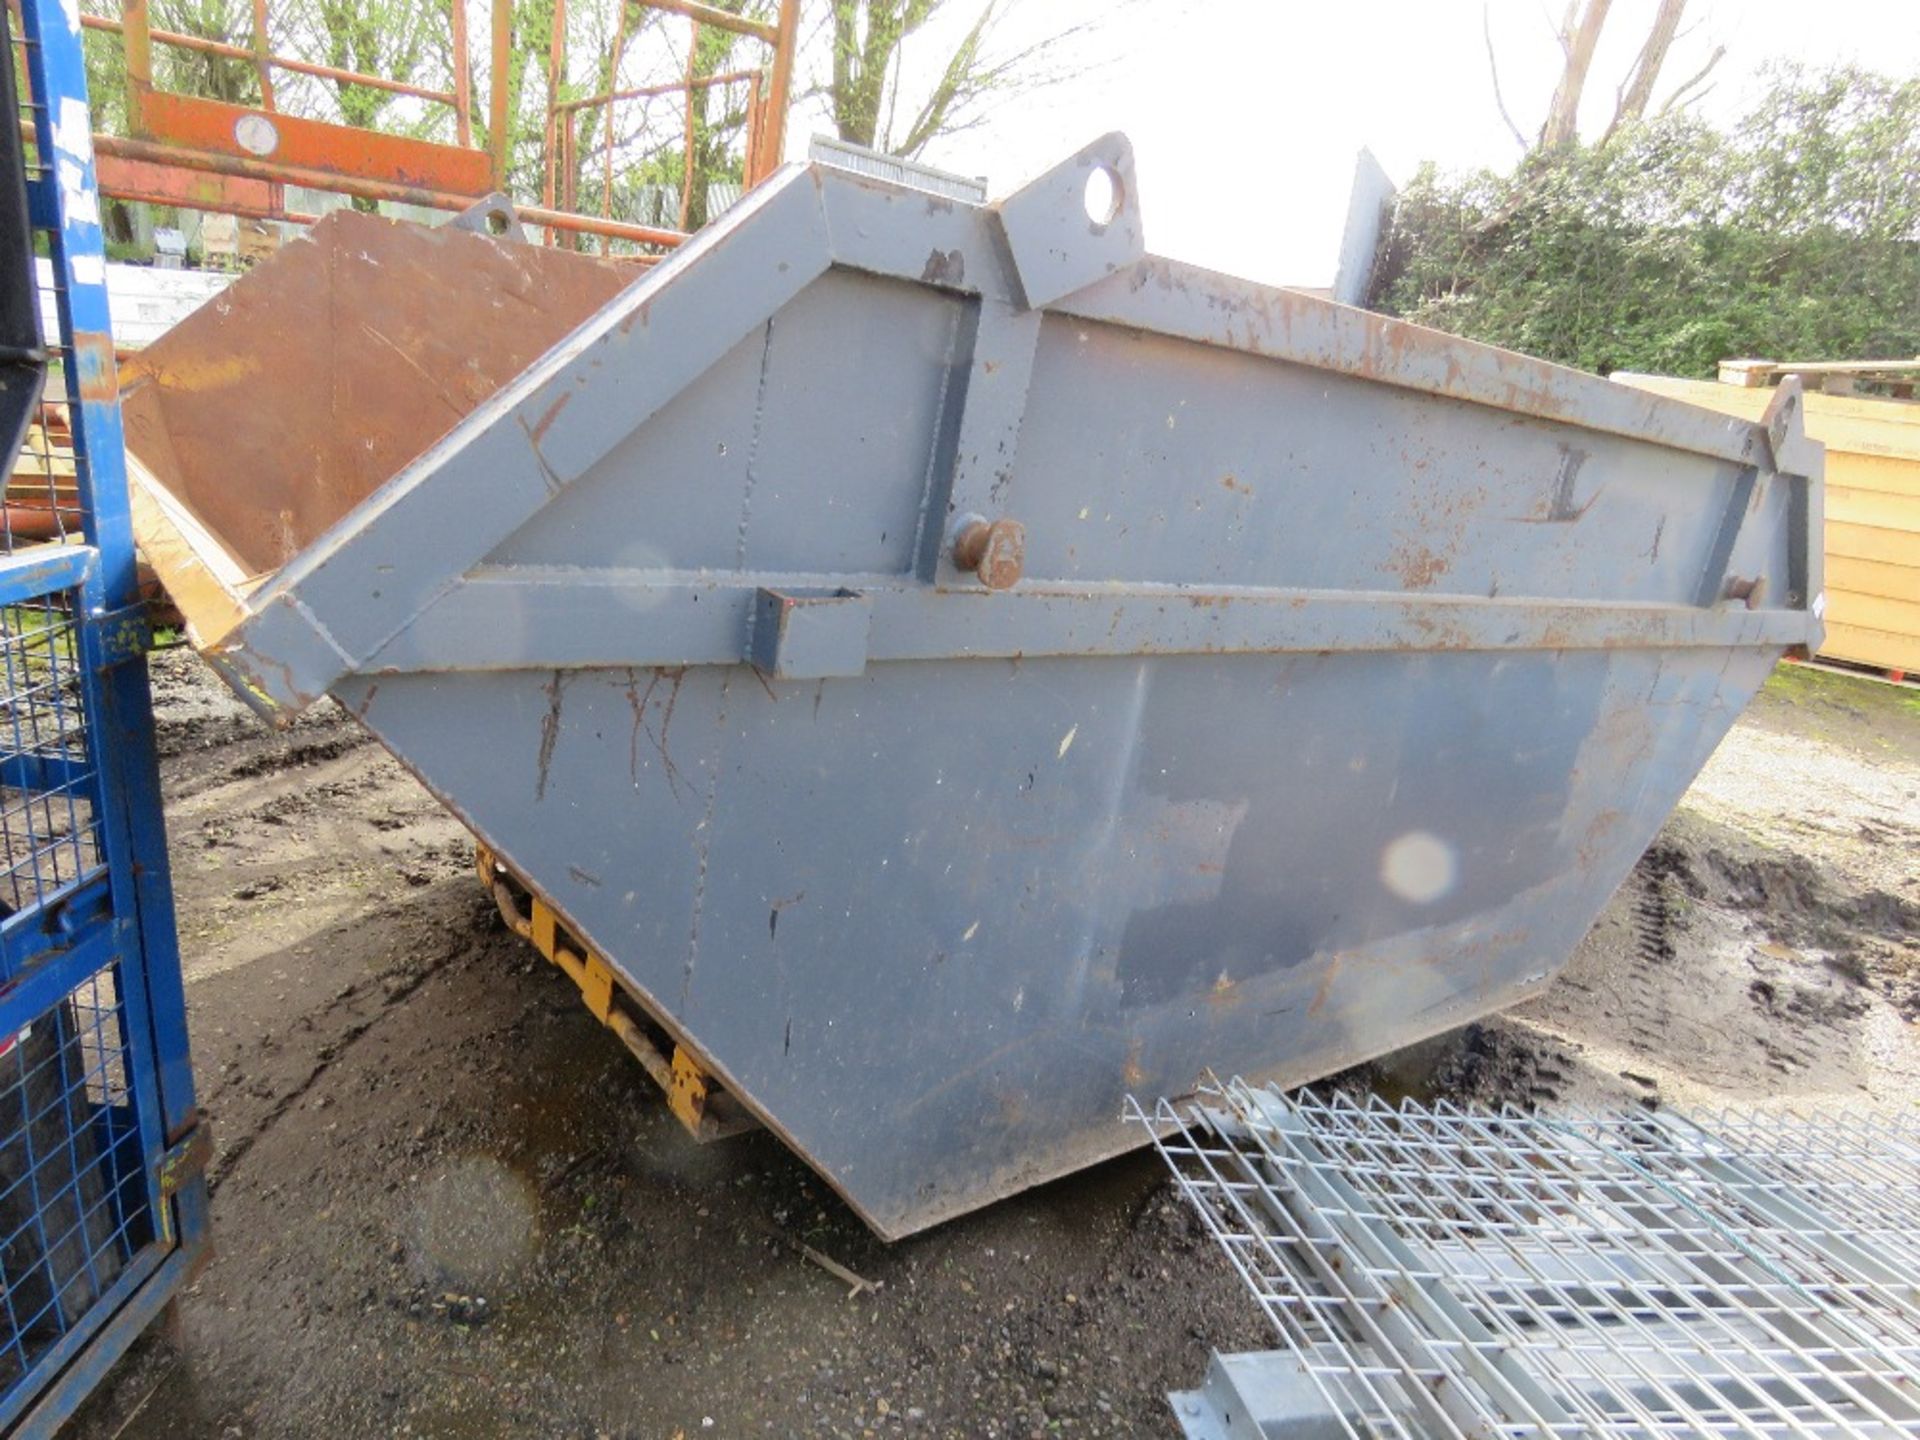 8 YARD SIZE CHAIN LIFT SKIP. CRANE LIFTING EYES AND HEAVY DUTY SPECIFICATION, APPEARS LITTLE USED. S - Image 3 of 4